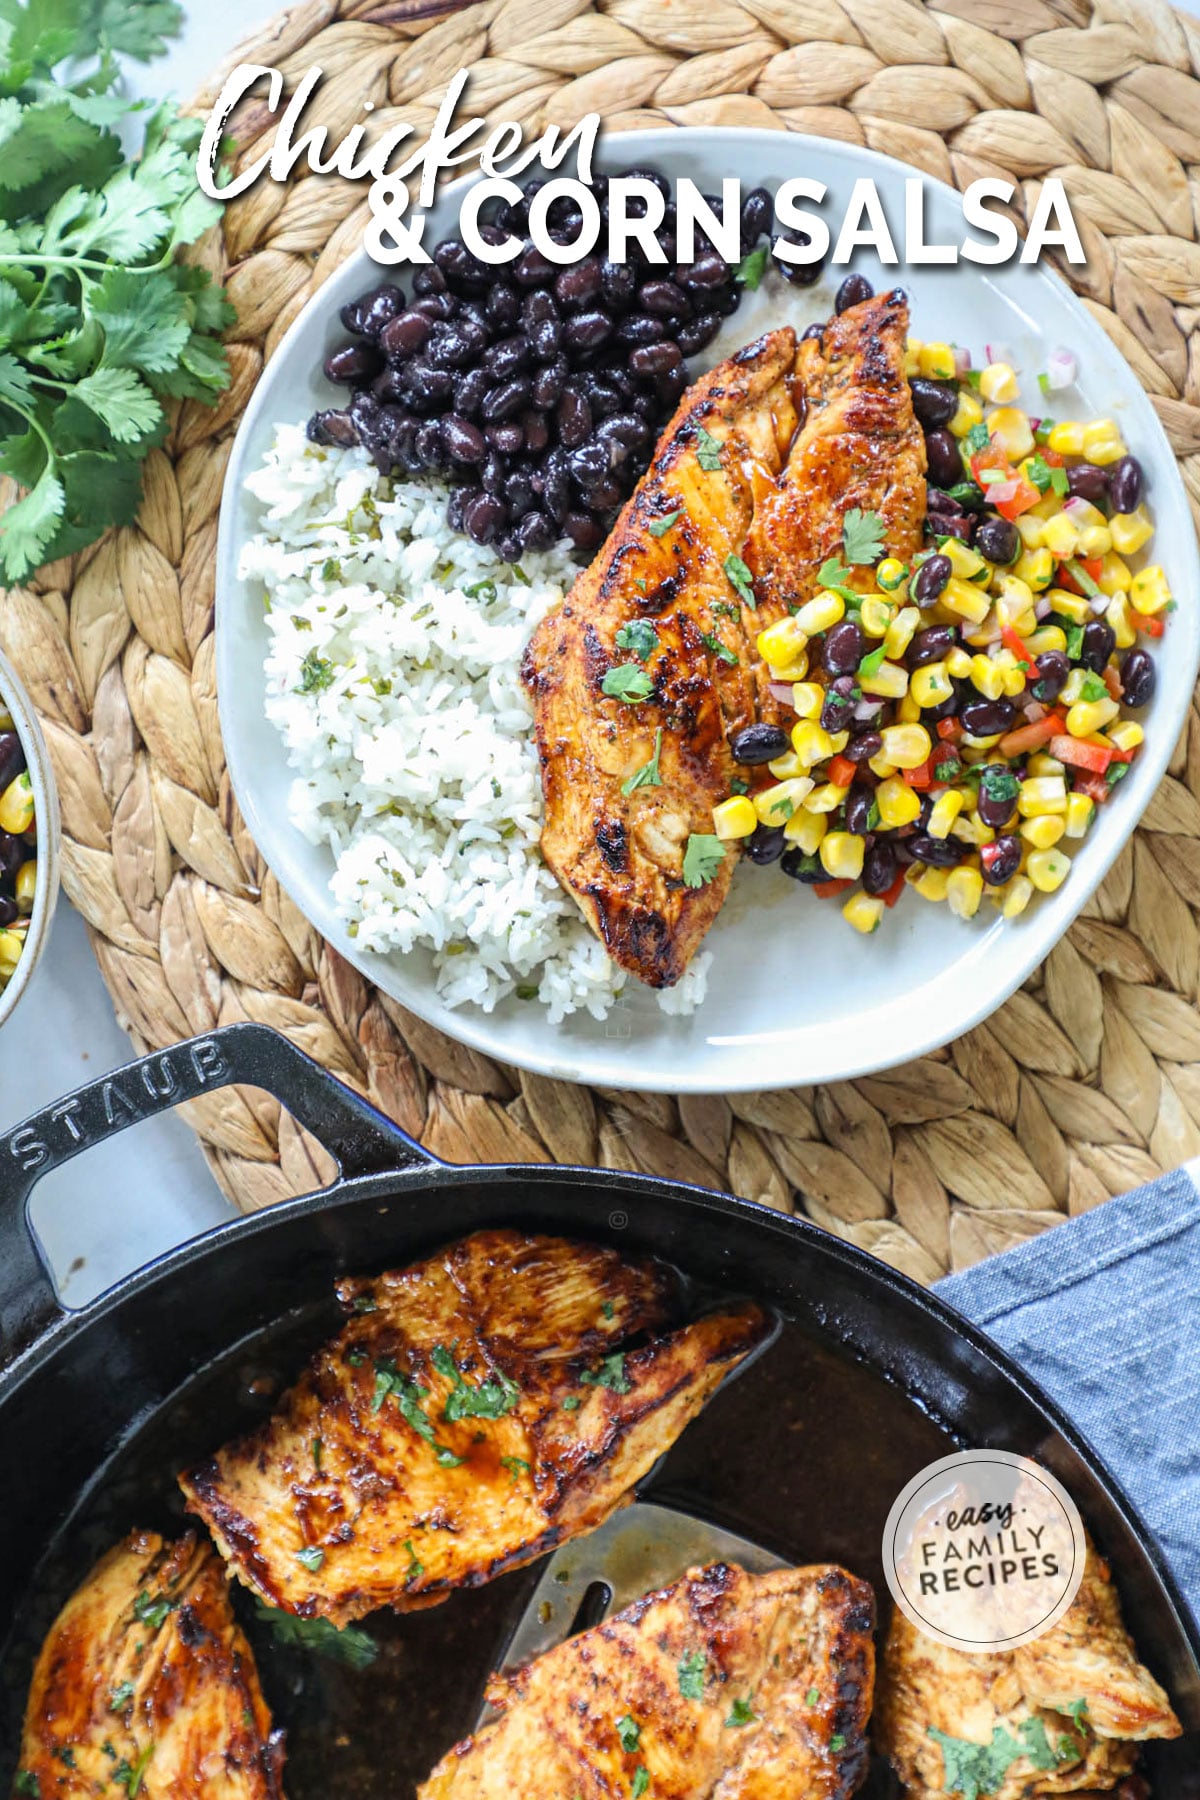 Seared chicken on a plate with corn salsa, black beans, and white rice with a skillet of chicken next to it.